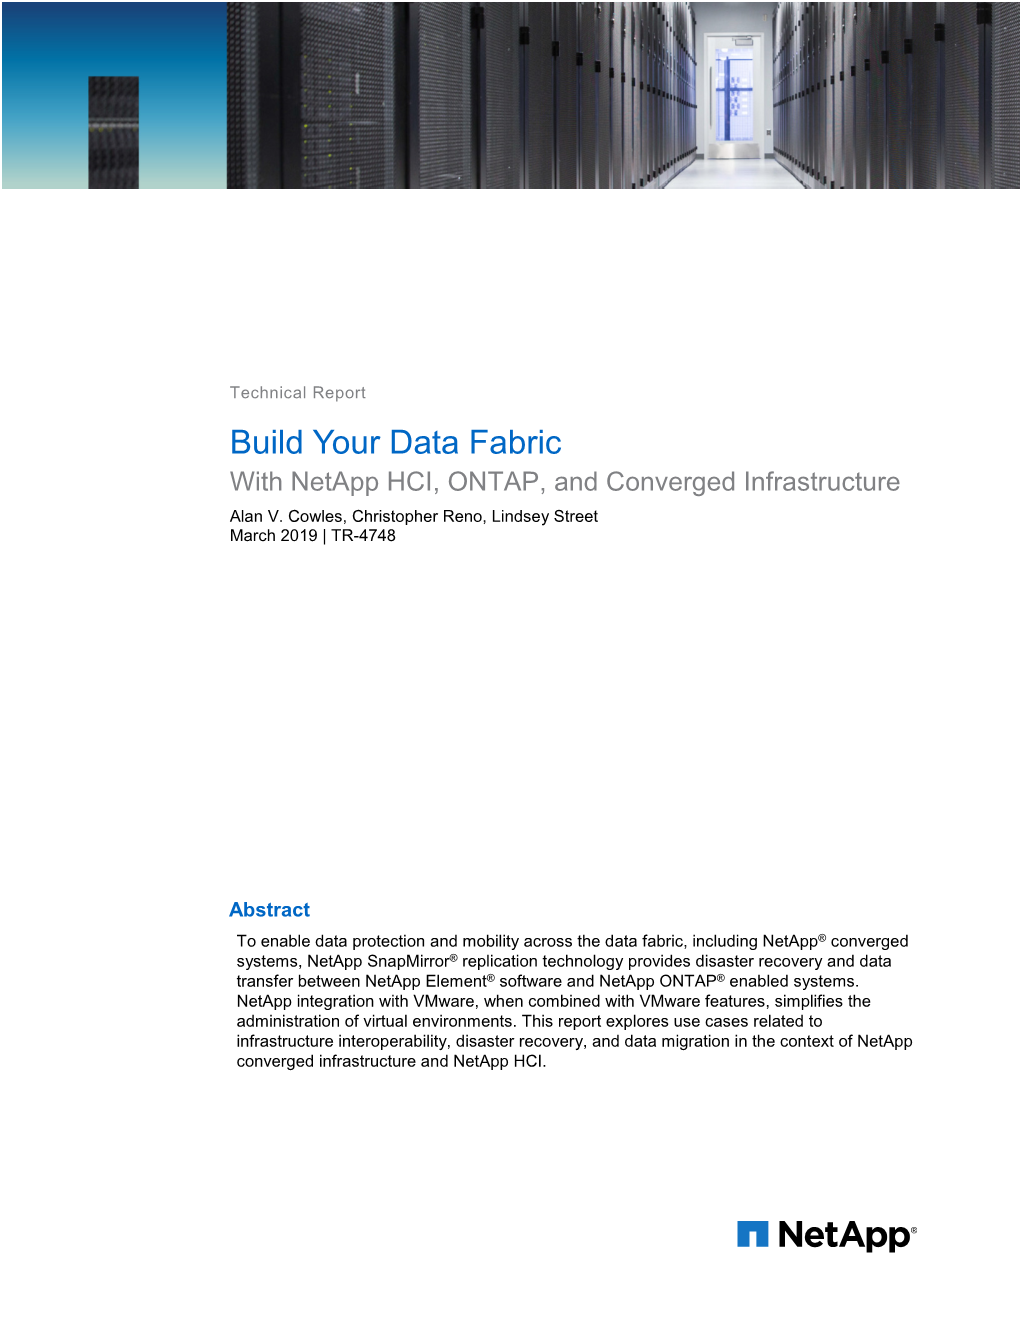 Build Your Data Fabric with Netapp HCI, ONTAP and Converged